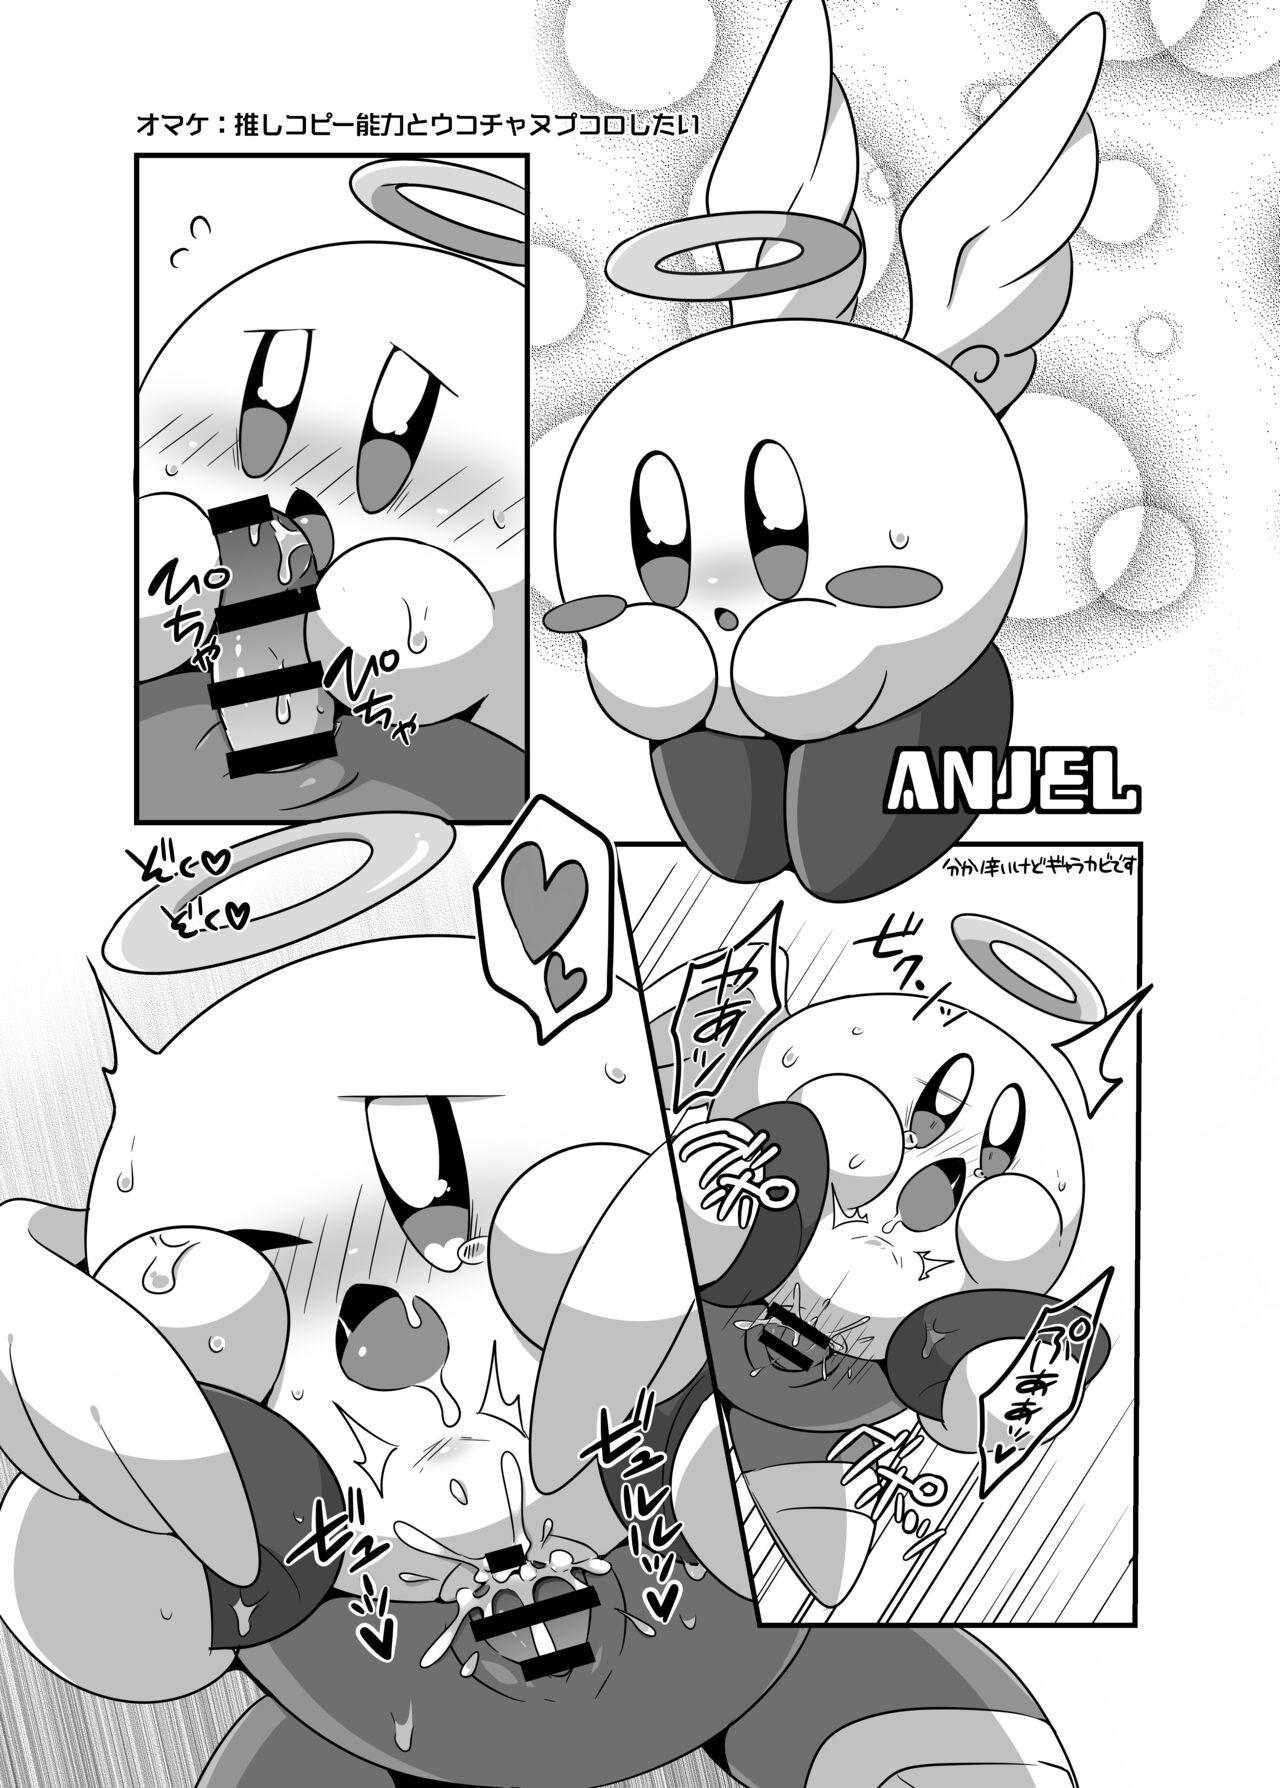 Spit I Want to Do XXX Even For Spheres! - Kirby Scissoring - Page 21